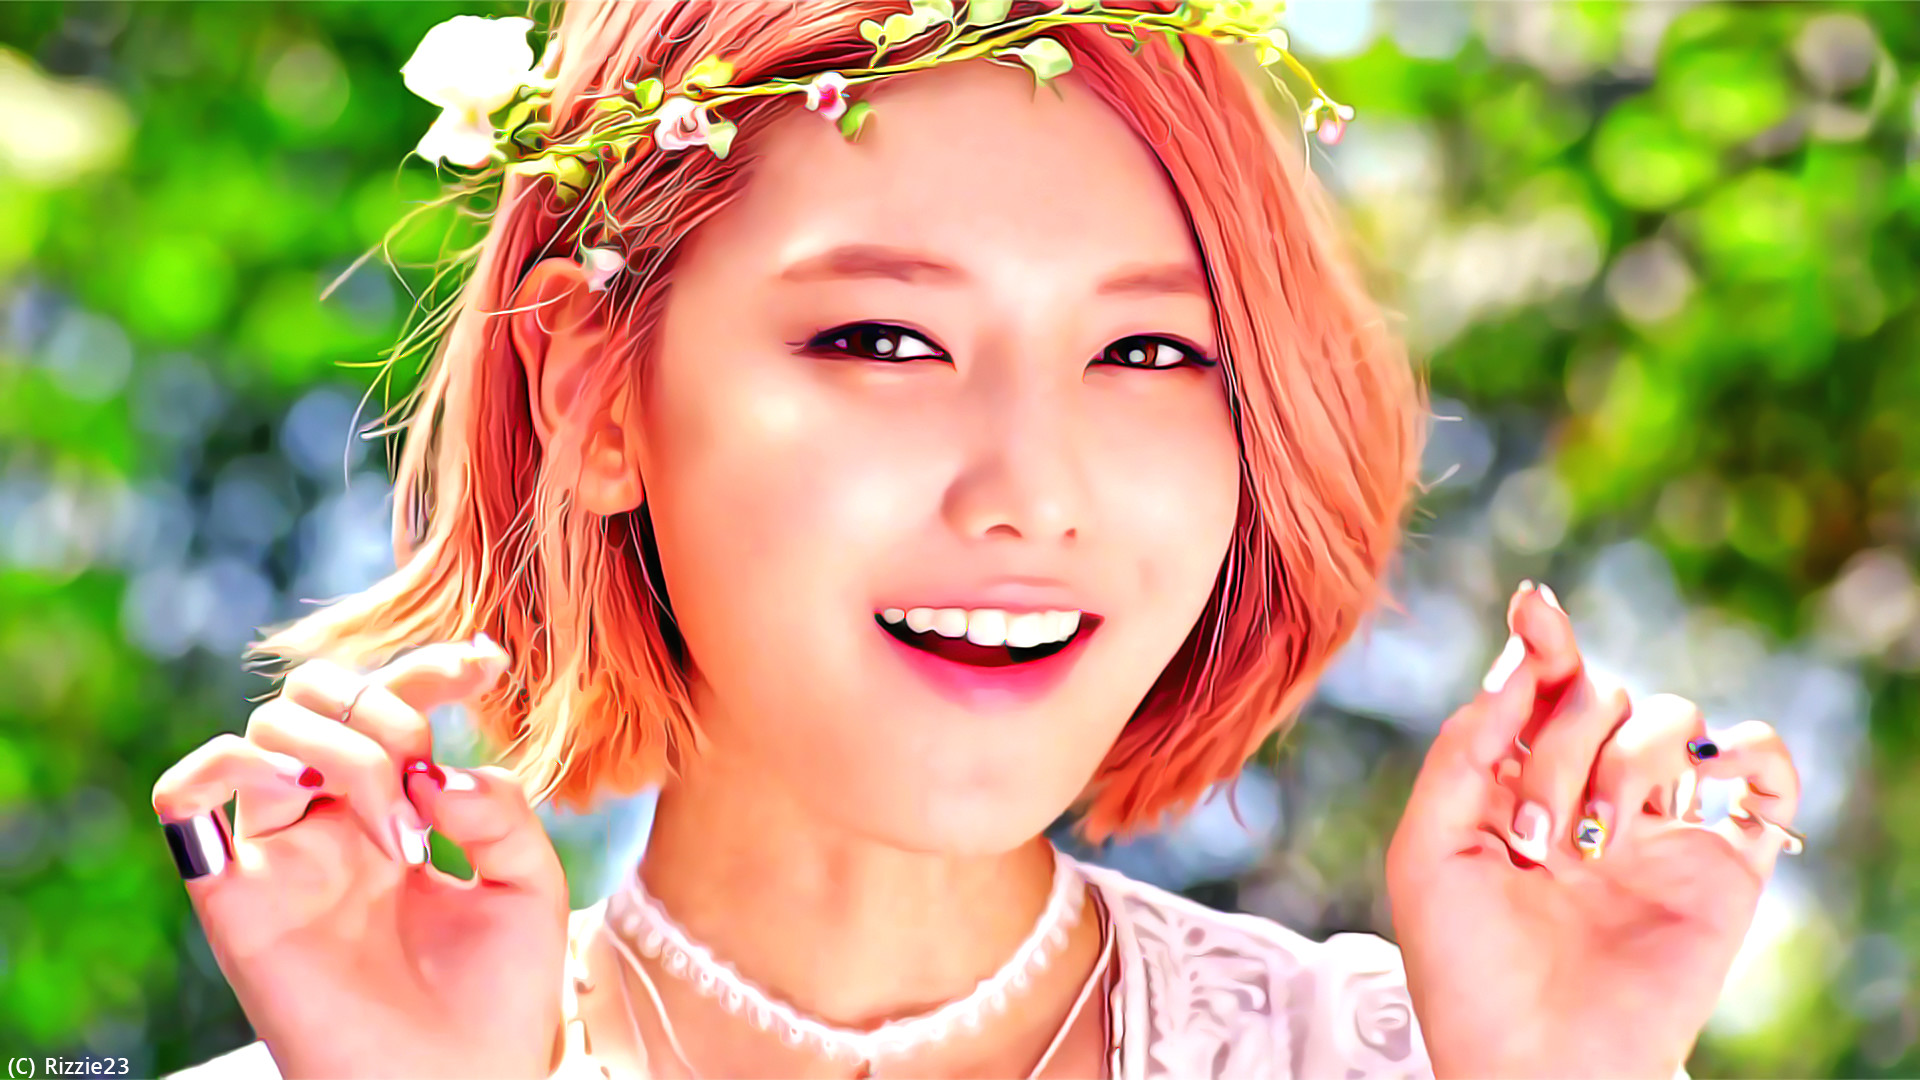 1920x1080 14 Flower Power Source Â· Wallpapers on Sooyoungsters DeviantArt